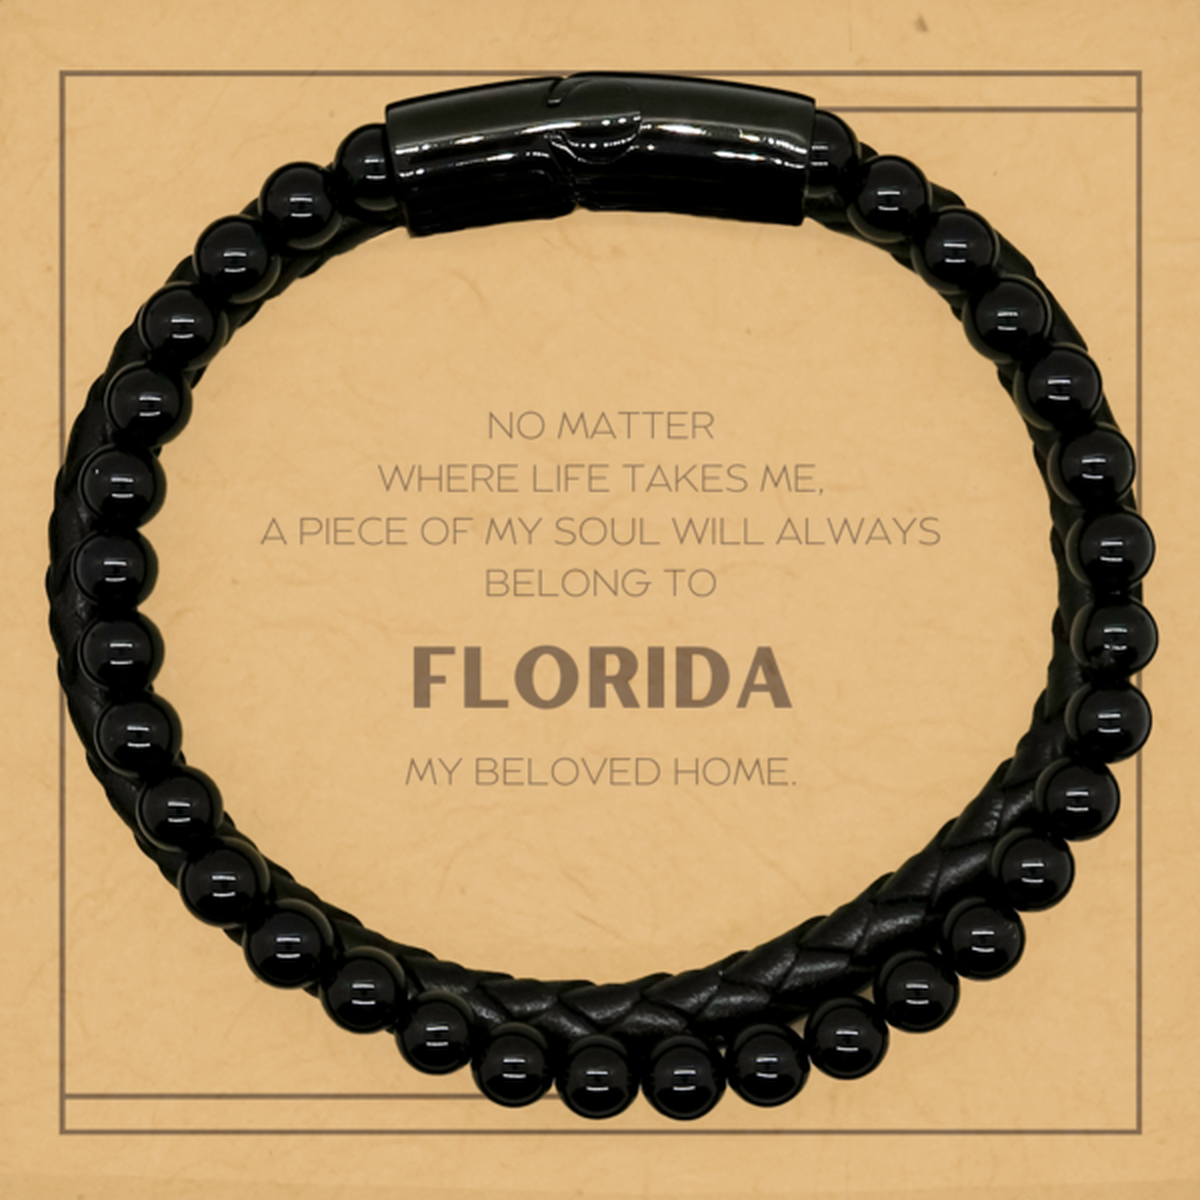 Love Florida State Gifts, My soul will always belong to Florida, Proud Stone Leather Bracelets, Birthday Unique Gifts For Florida Men, Women, Friends